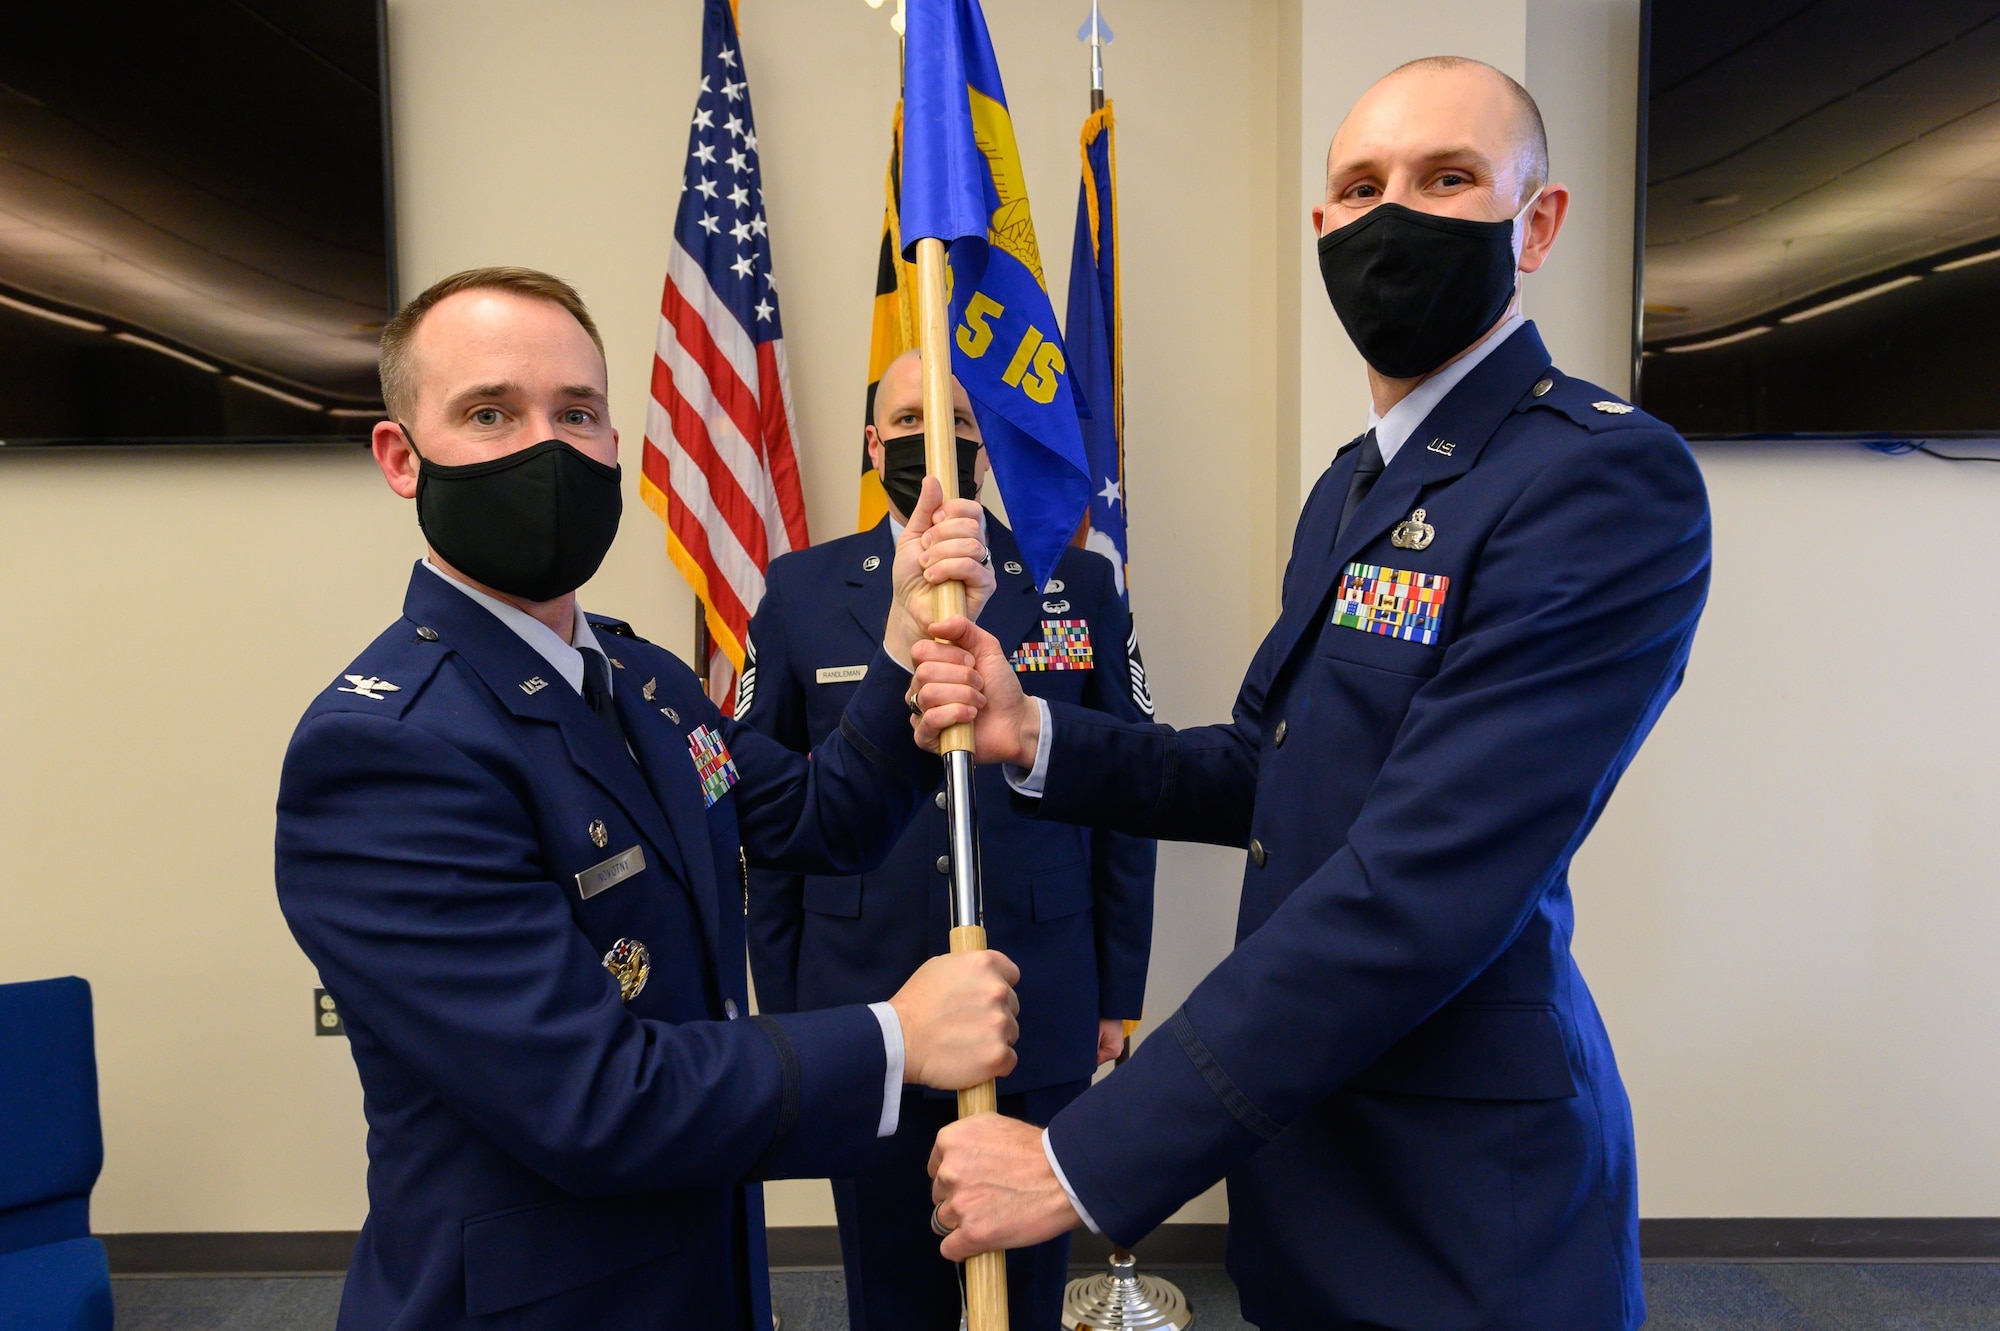 (From left) Air Force Col. Reid Novotny, the commander for the 175th Cyber Operations Group, passes the 135th Intelligence Squadron guidon to U.S. Air Force Lt. Col. John Ippoliti, incoming 135th IS commander, Feb. 12, 2022, during a change of command ceremony for the 135th IS at Warfield Air National Guard Base at Martin State Airport, Middle River, Maryland. The passing of the guidon symbolizes the passing of command from one service member to another. (U.S. Air National Guard photo by Staff Sgt. Sarah M. McClanahan)